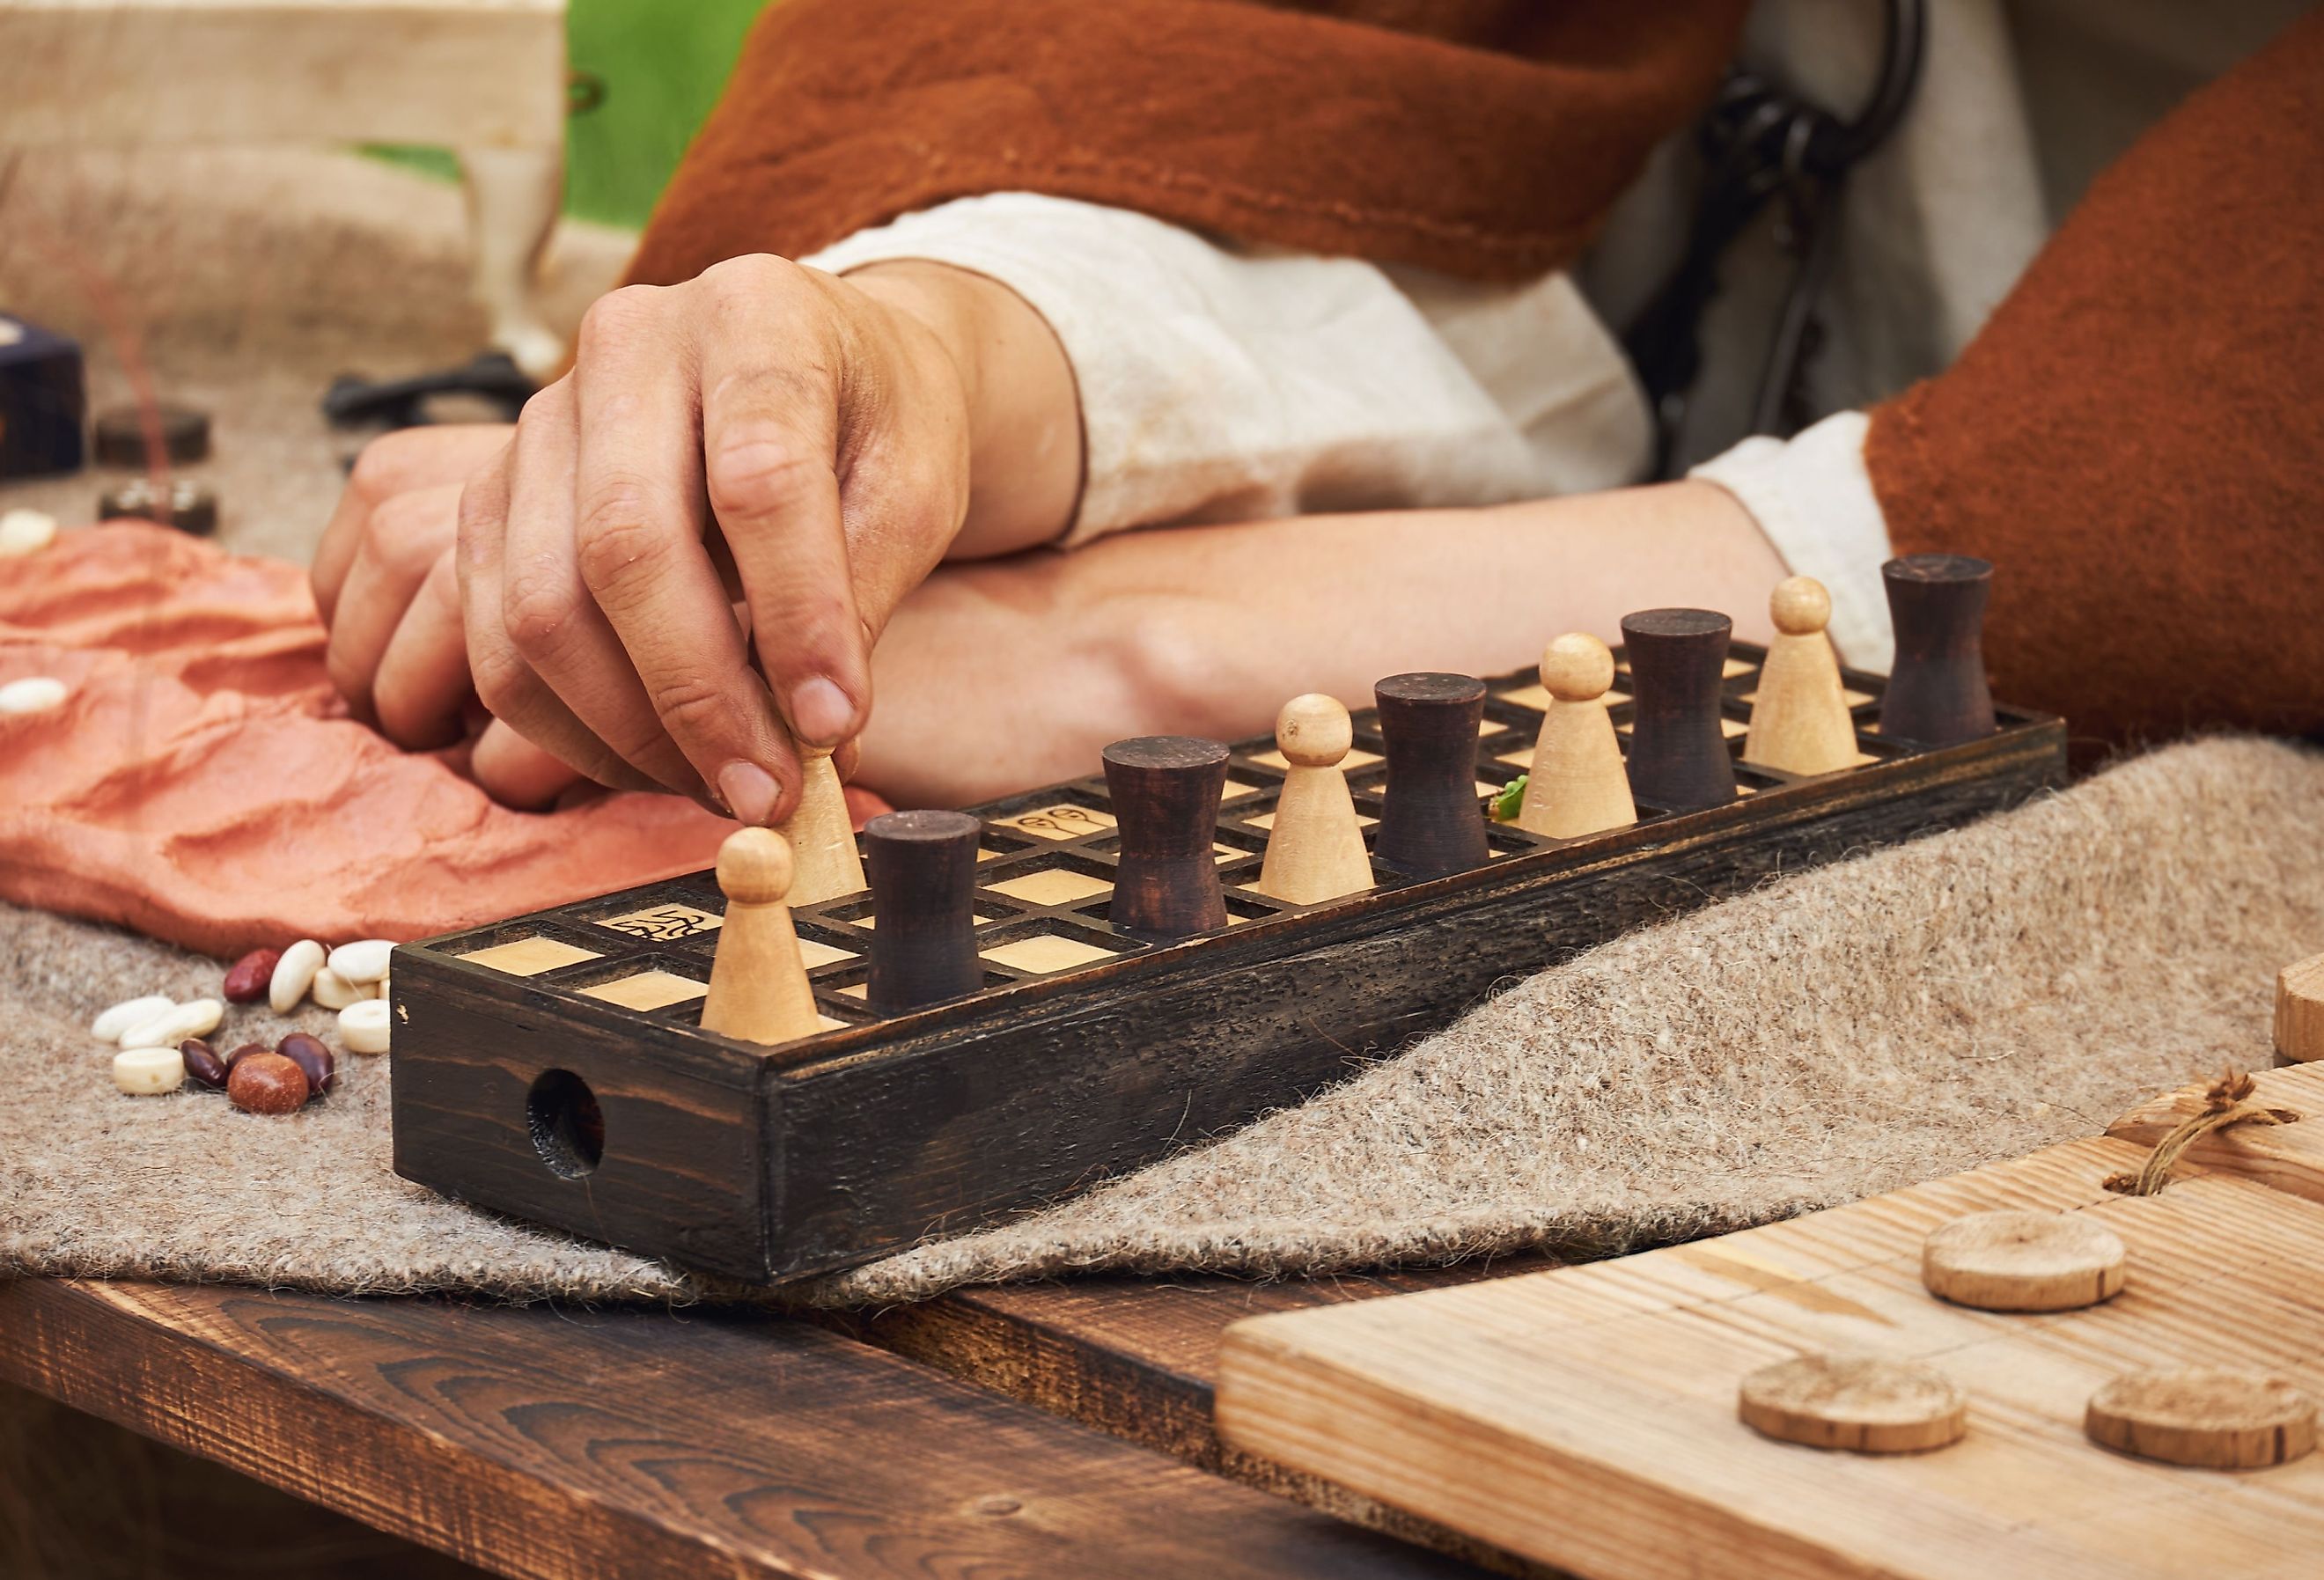 Senet is a game originally from Egypt, popular in ancient Rome. Image credit Zhuravlev Andrey via shutterstock